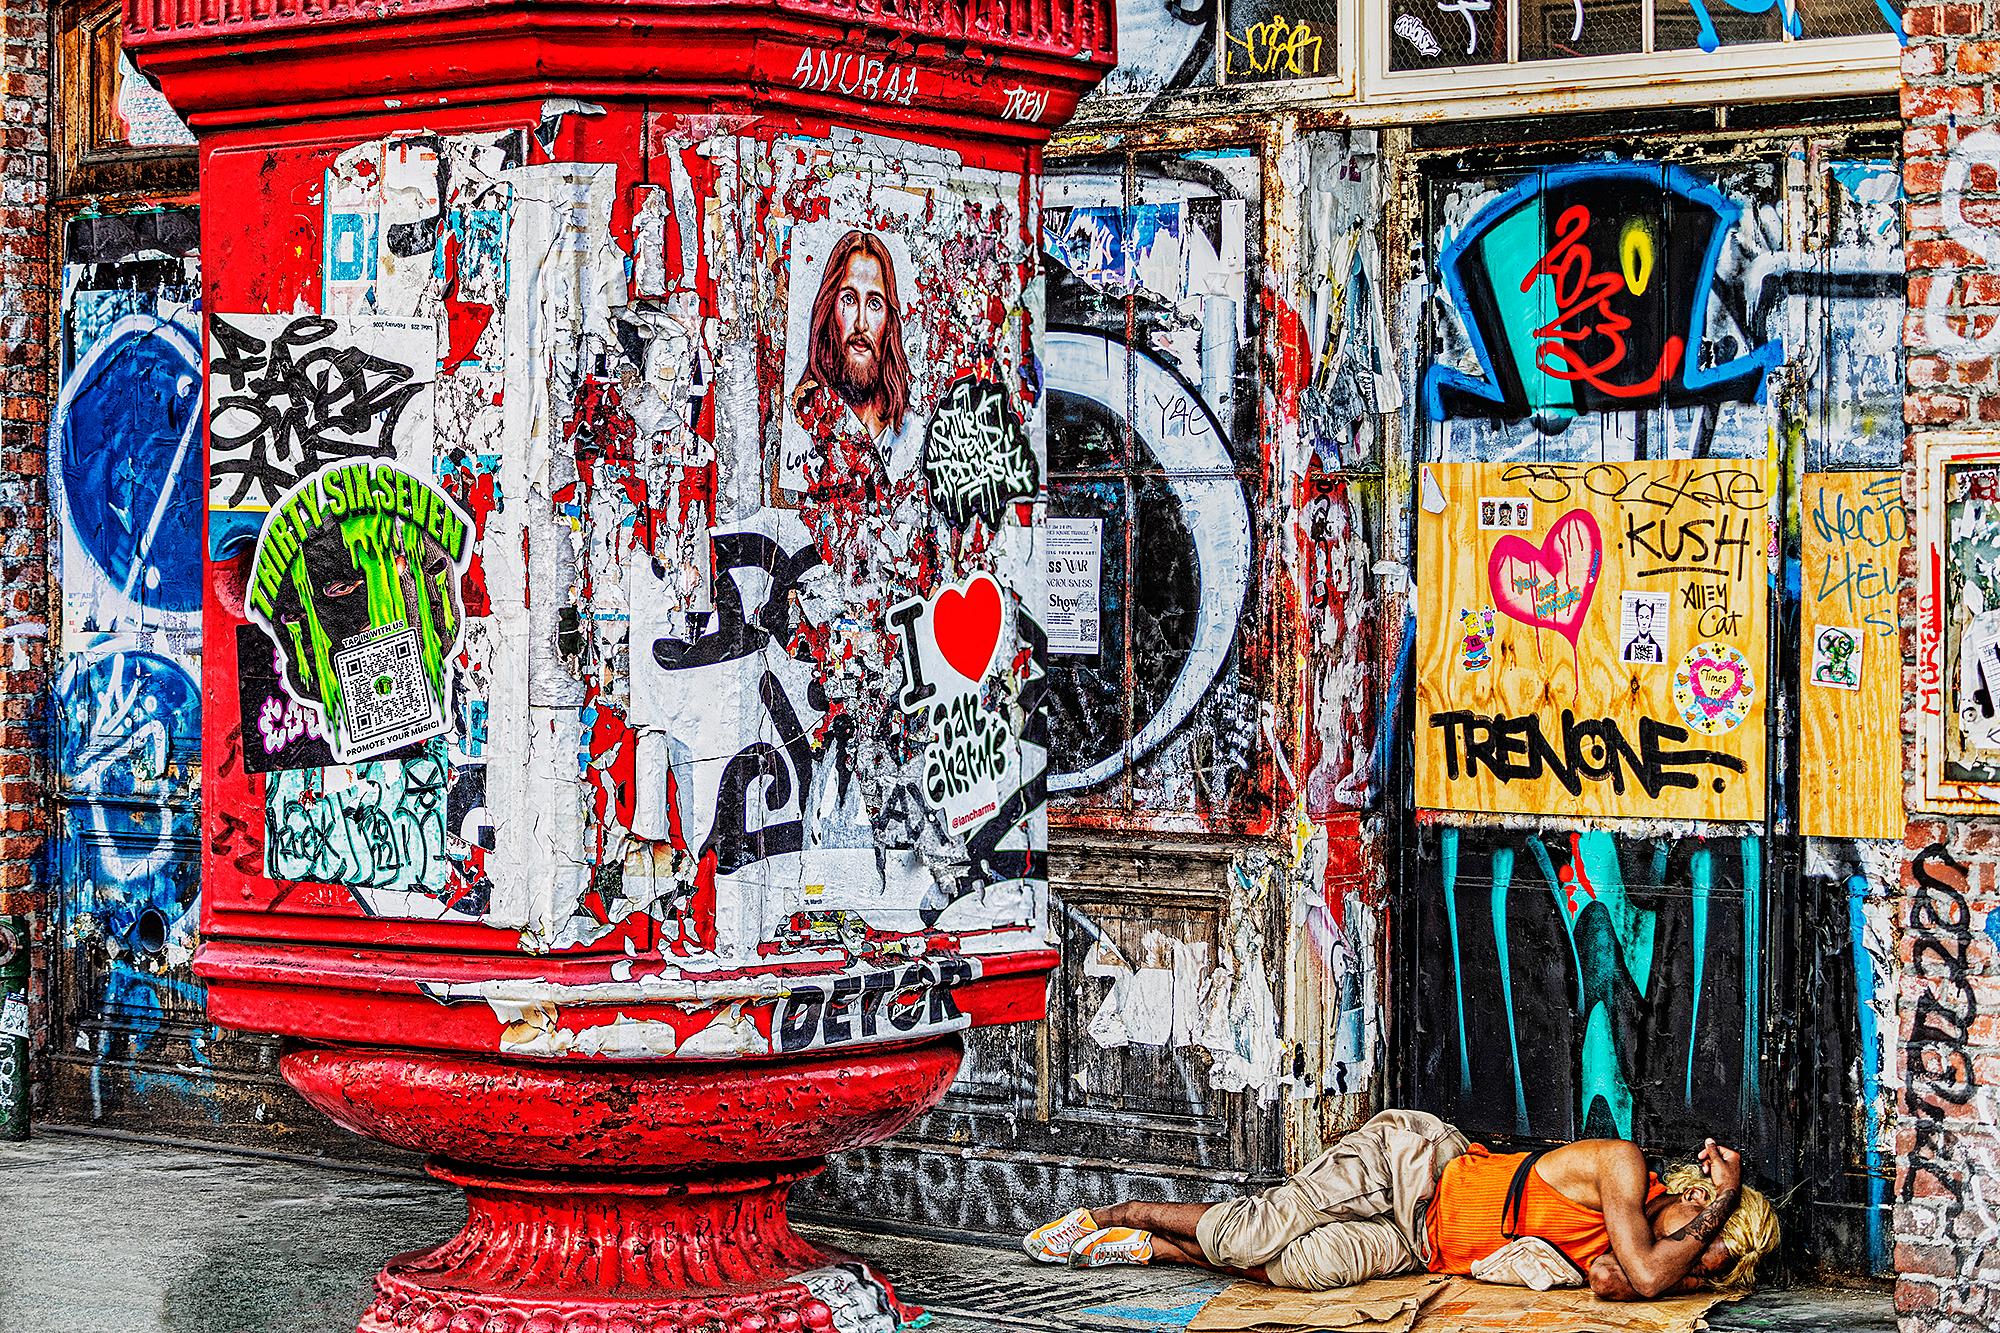 Bowery Street Scene with Abstract Graffiti